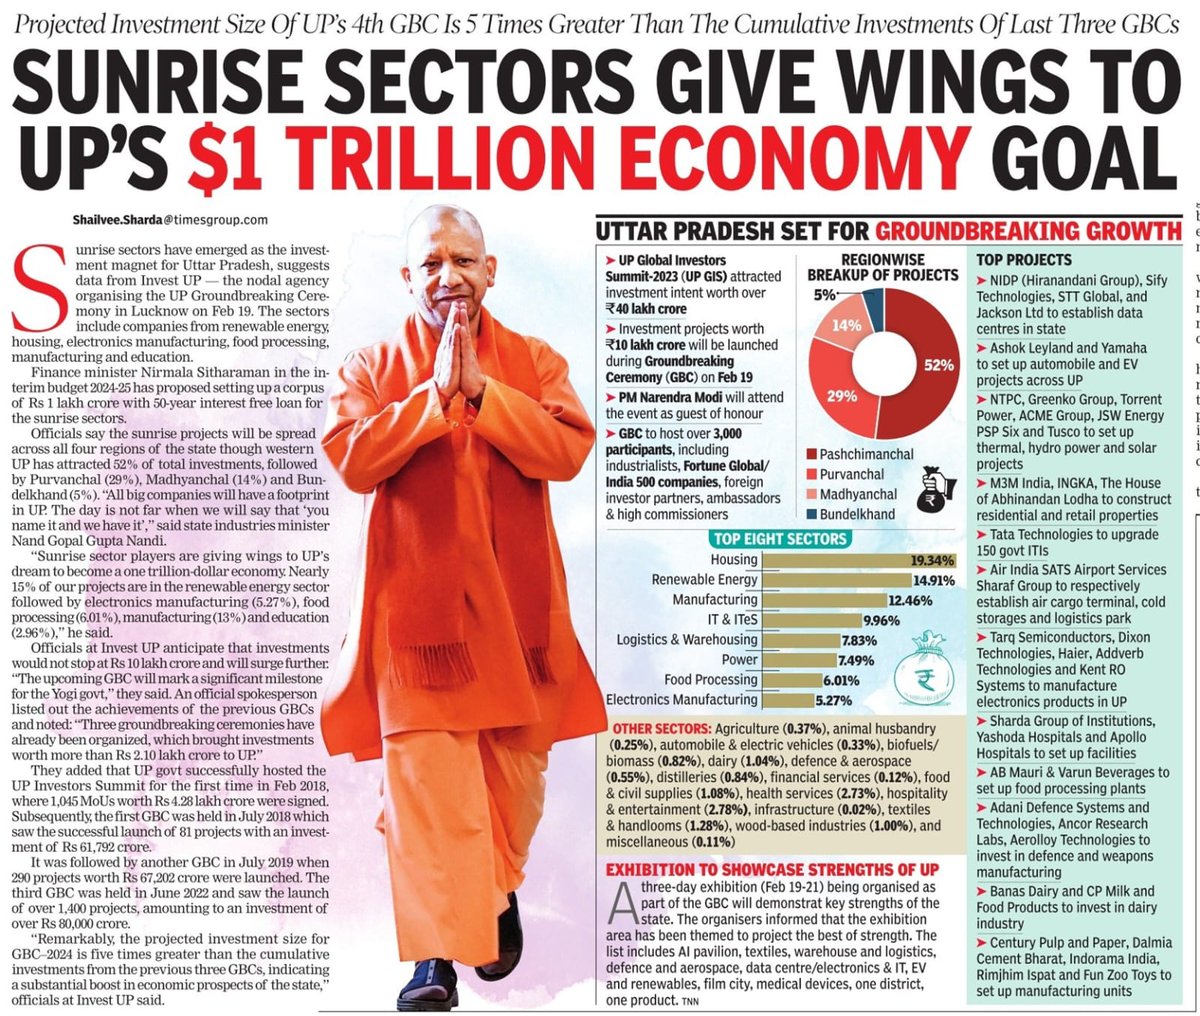 #InNews #UttarPradesh set for Ground Breaking #Growth. #InvestUP is organising the #GBC in #Lucknow on 19th Feb. Sunrise sectors to give wings to UP's $1 Trillion #Economy goal. #Project #Investment size of #GBC4 five times greater than the cumulative investments of last 3 GBCs.…